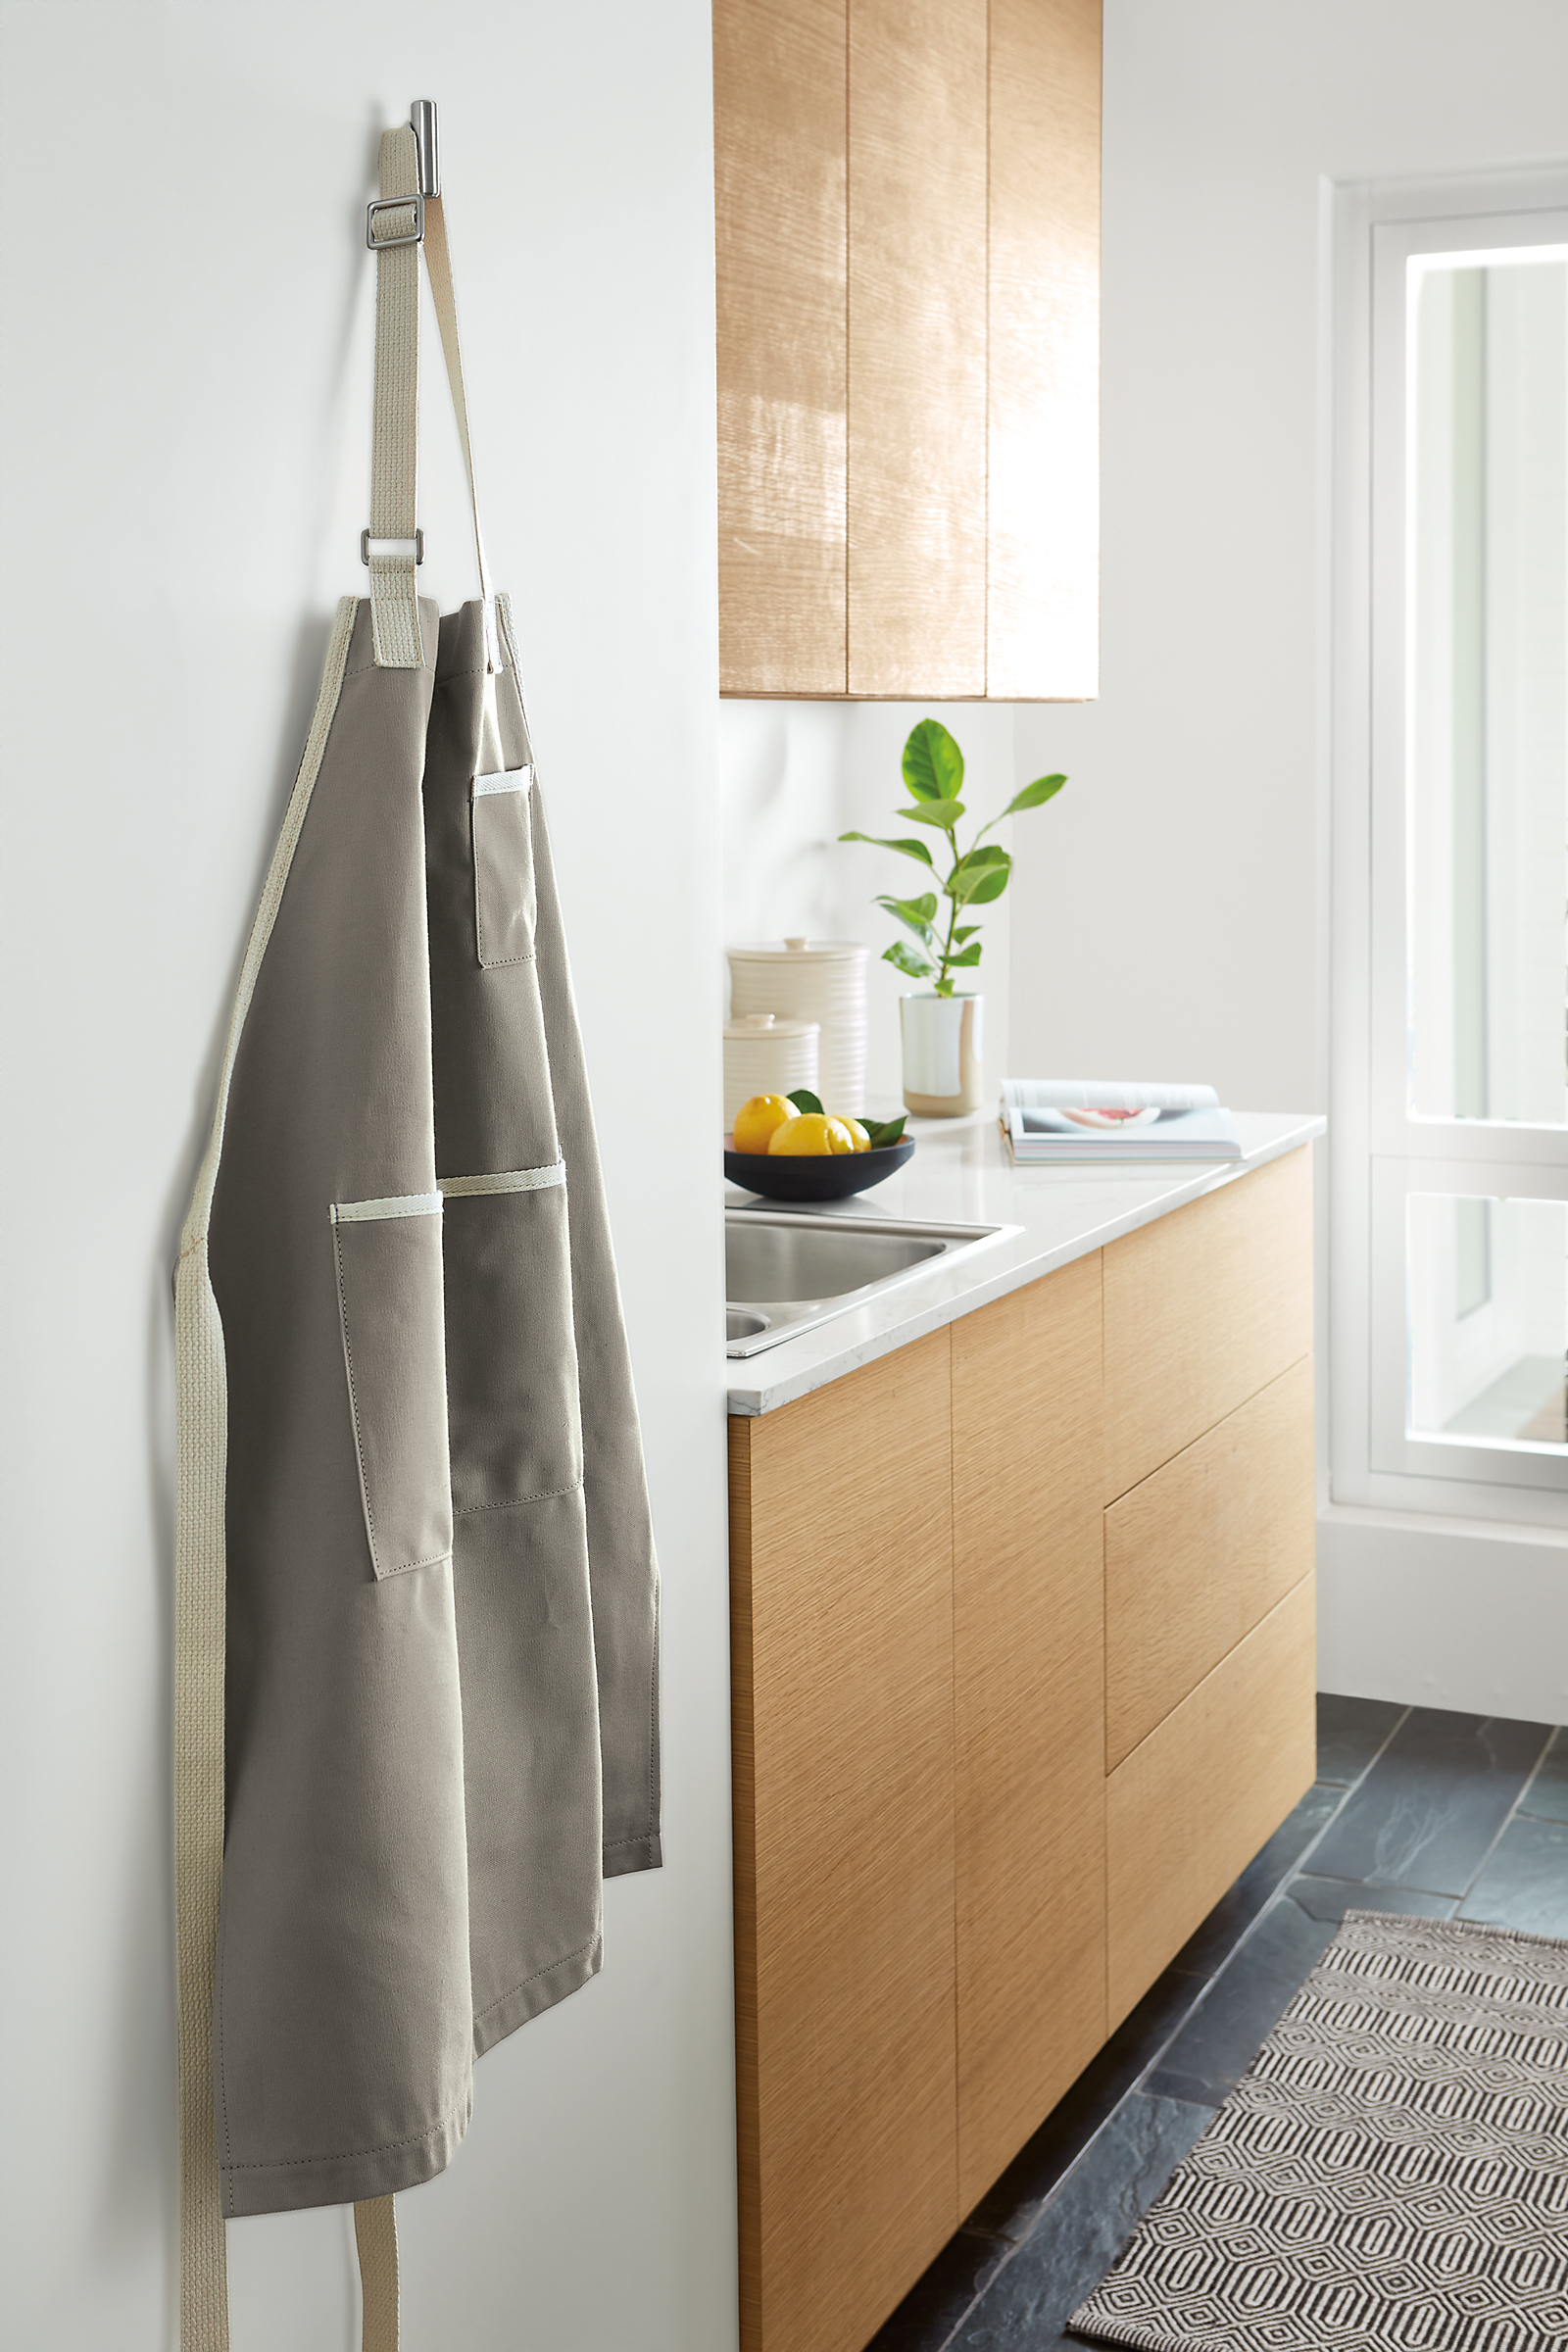 Kitchen image with renzo apron on pier wall hook.